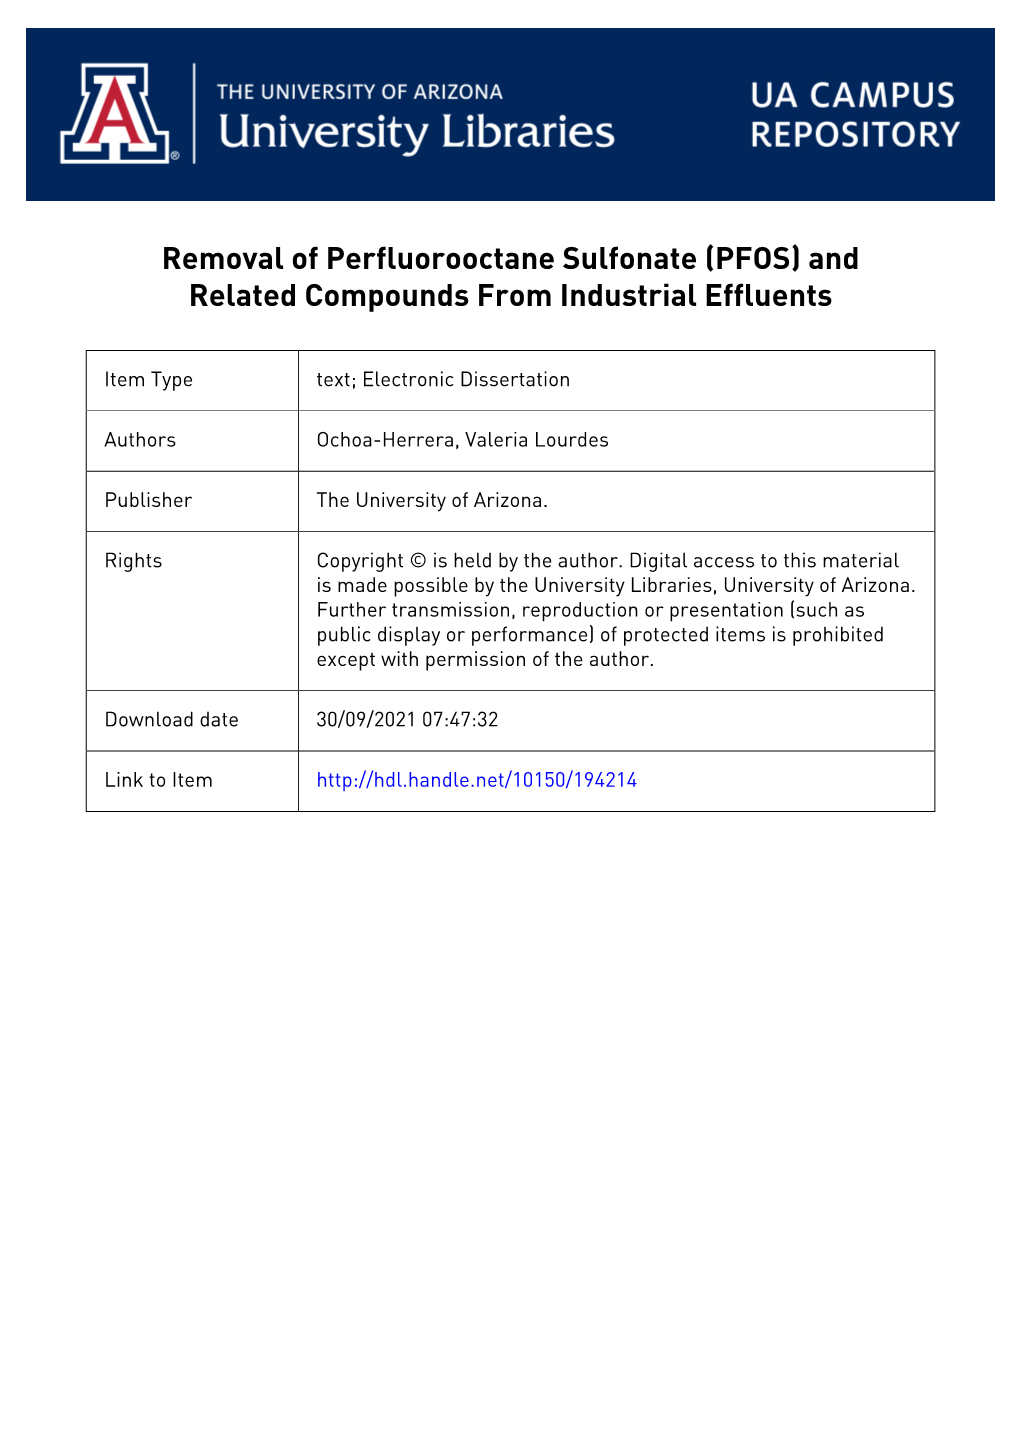 Removal of Perfluorooctane Sulfonate (PFOS) and Related Compounds from Industrial Effluents